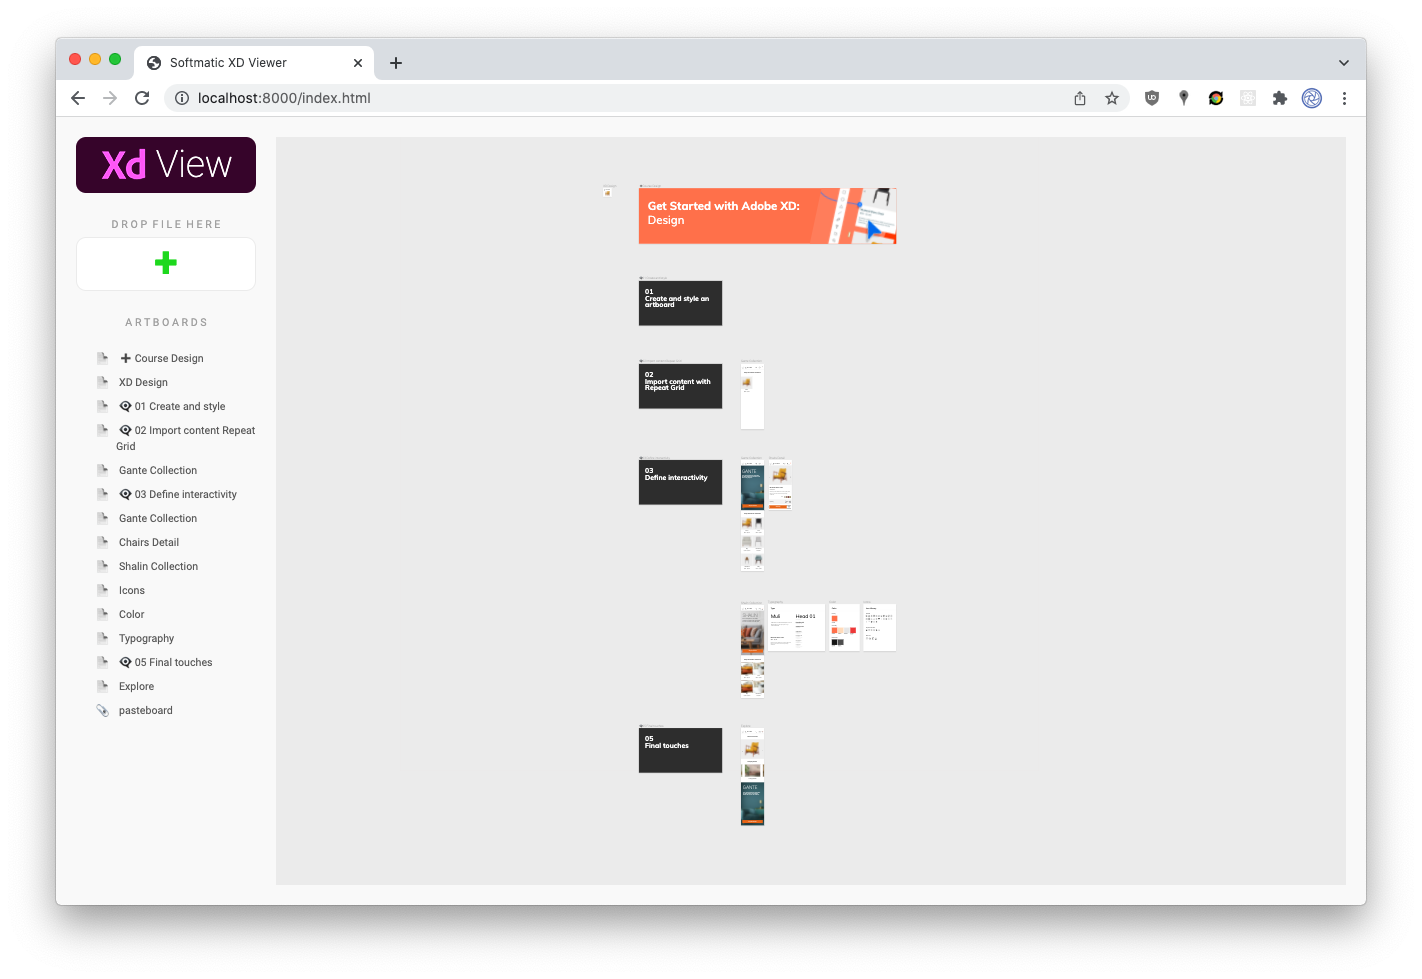 Screenshot: Adobe XD Sample File Rendered with the Softmatic XD Viewer